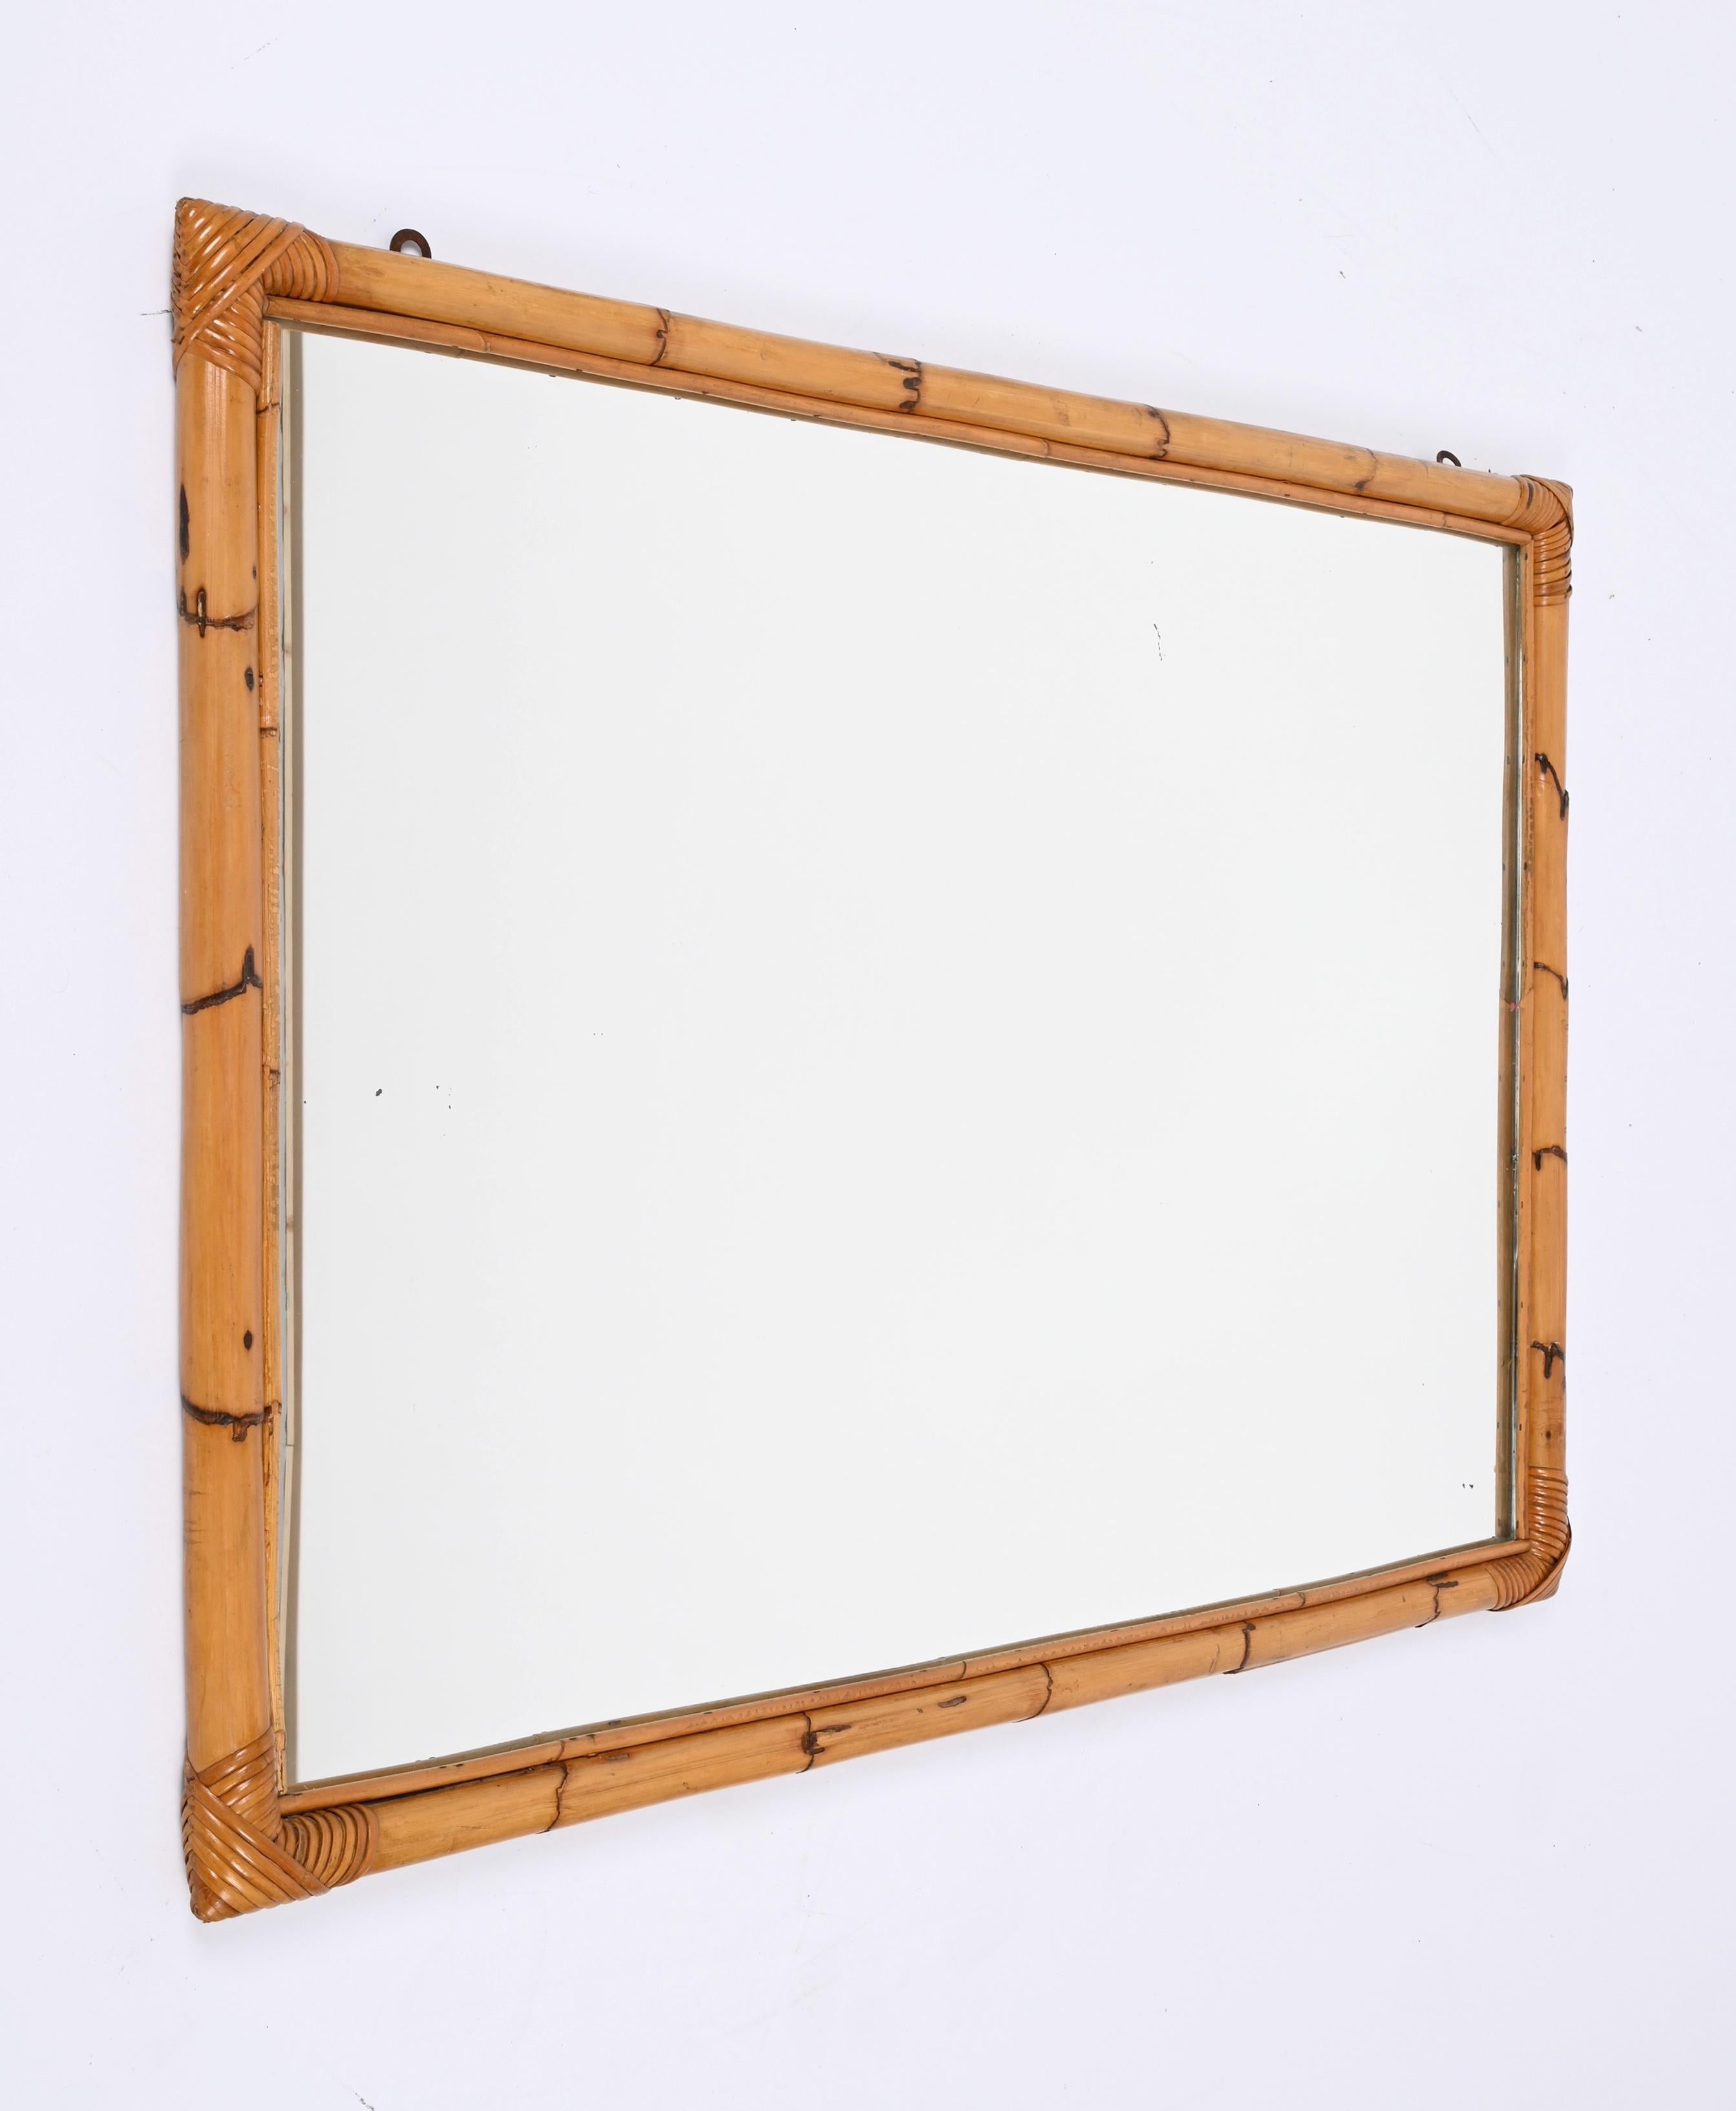 20th Century Midcentury Large Rectangular Italian Mirror with Double Bamboo Cane Frame, 1970s For Sale